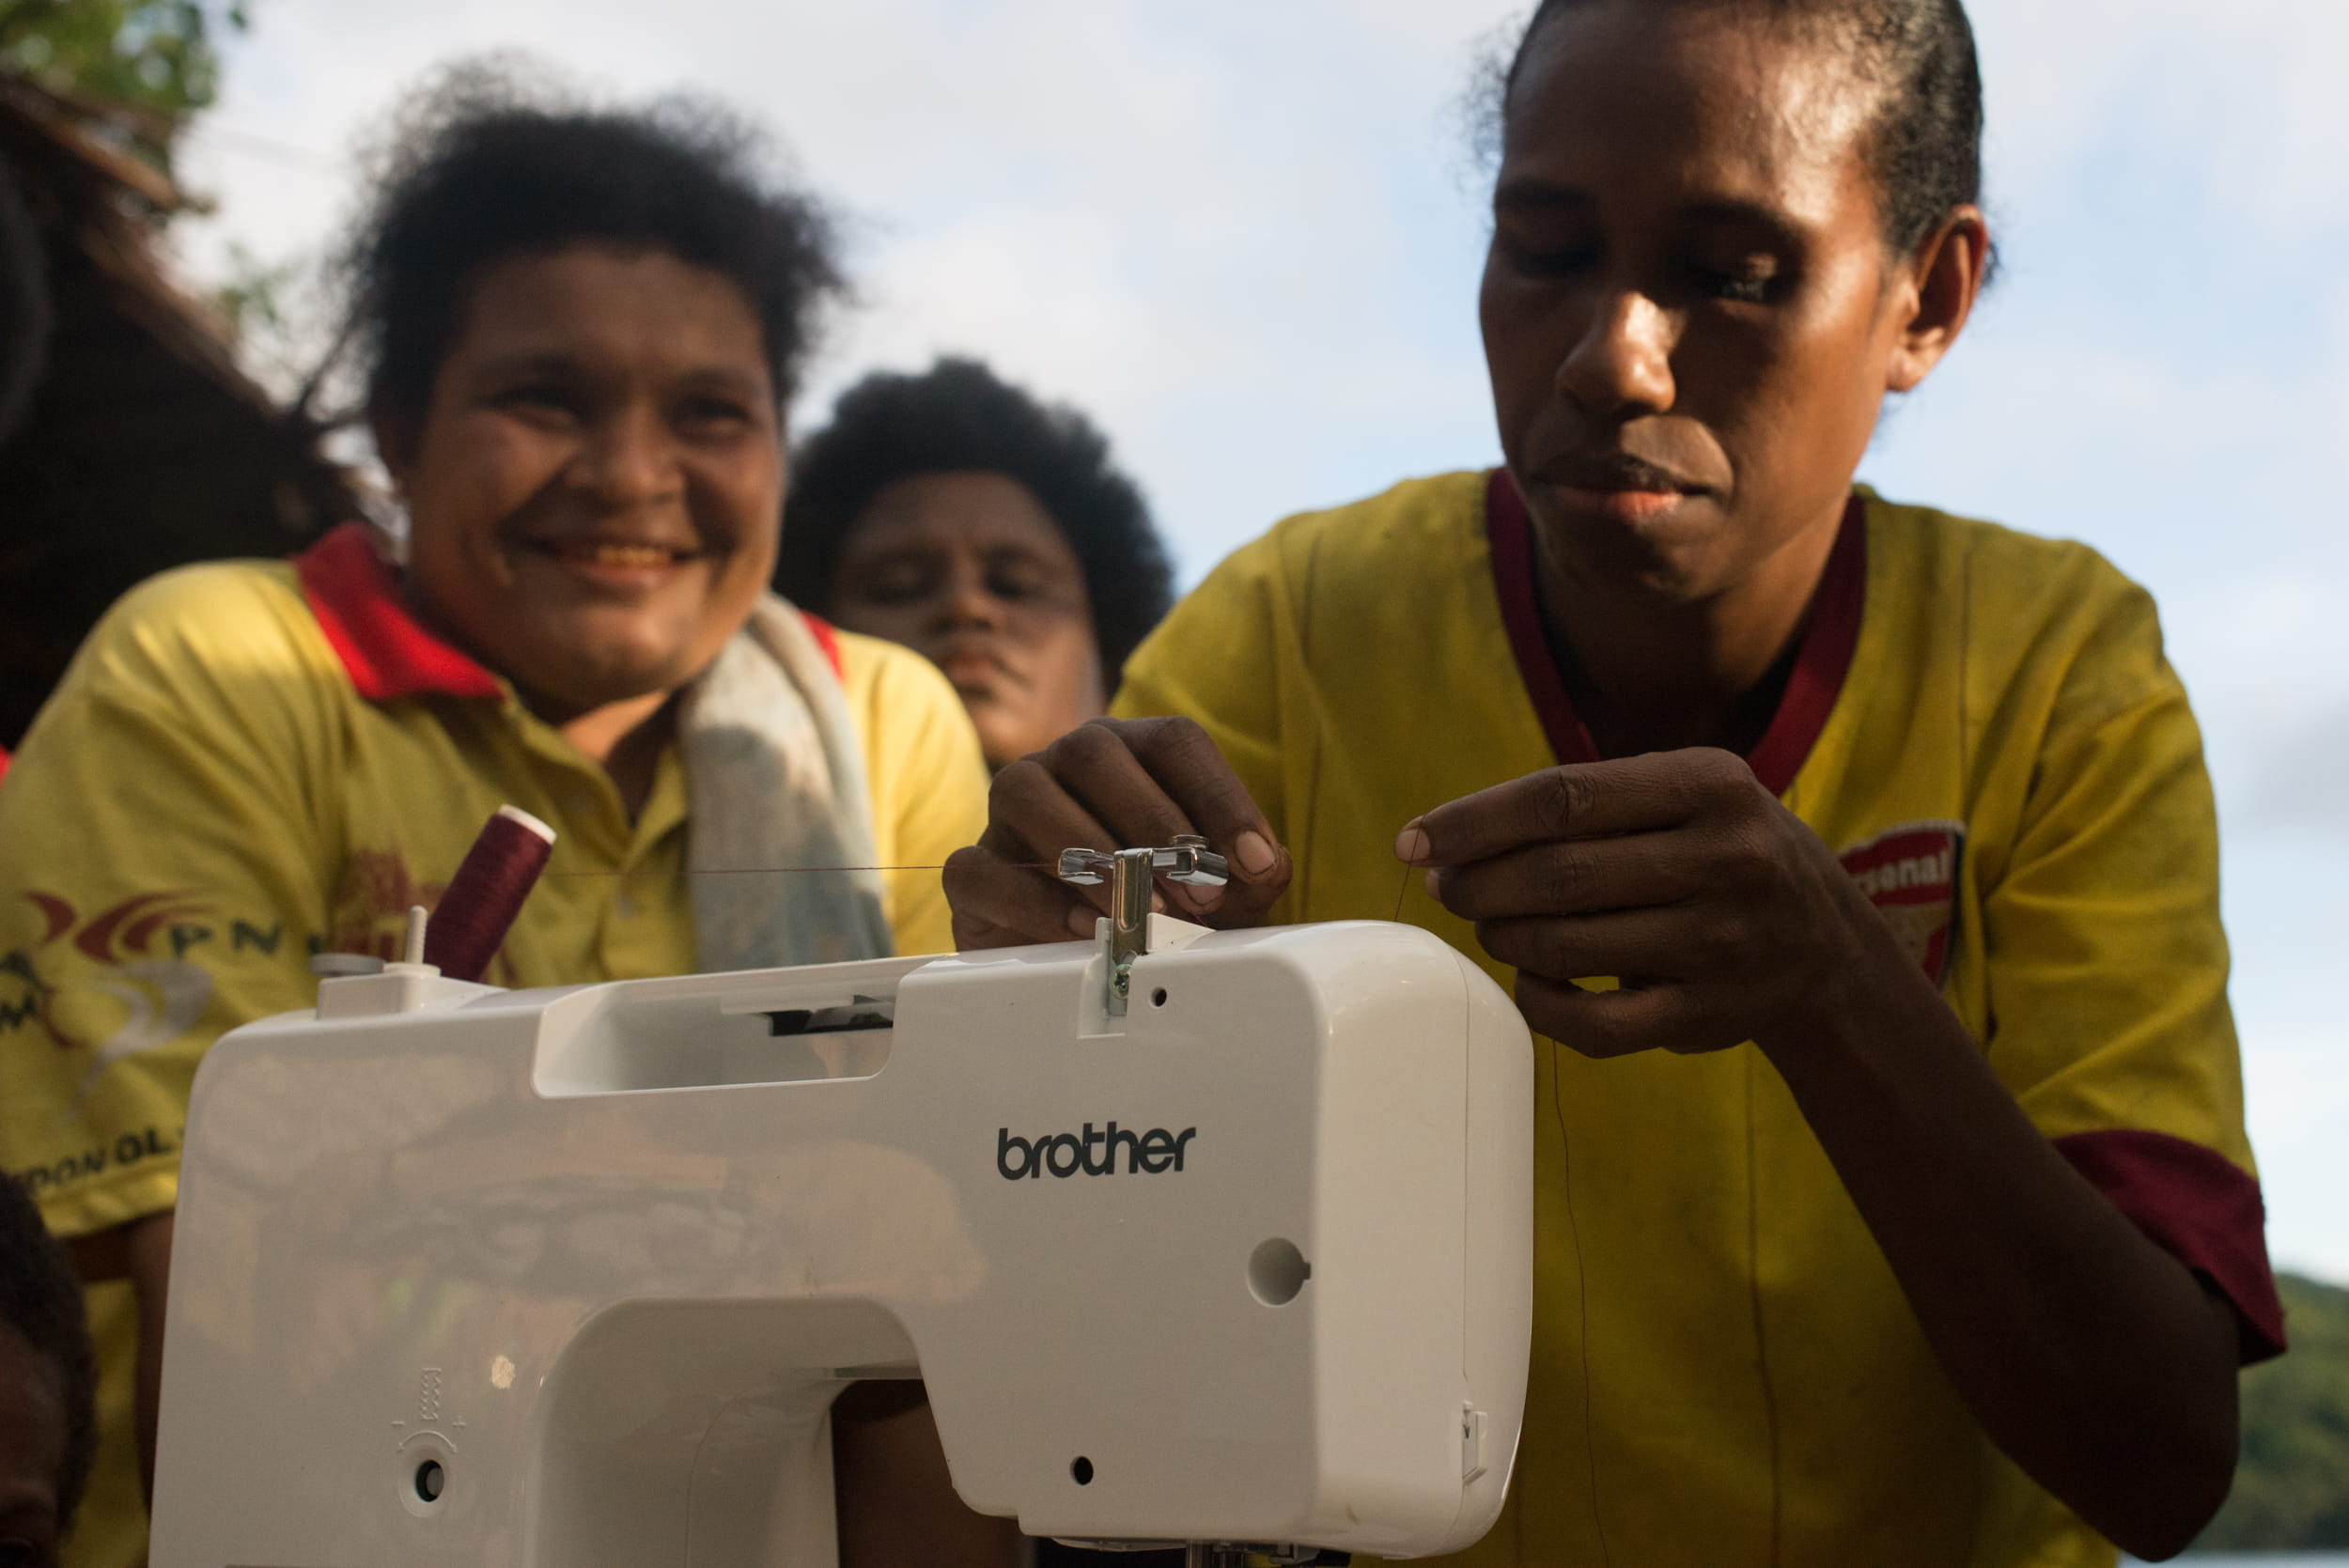 Stalie sewing group papua new guinea using a brother machine